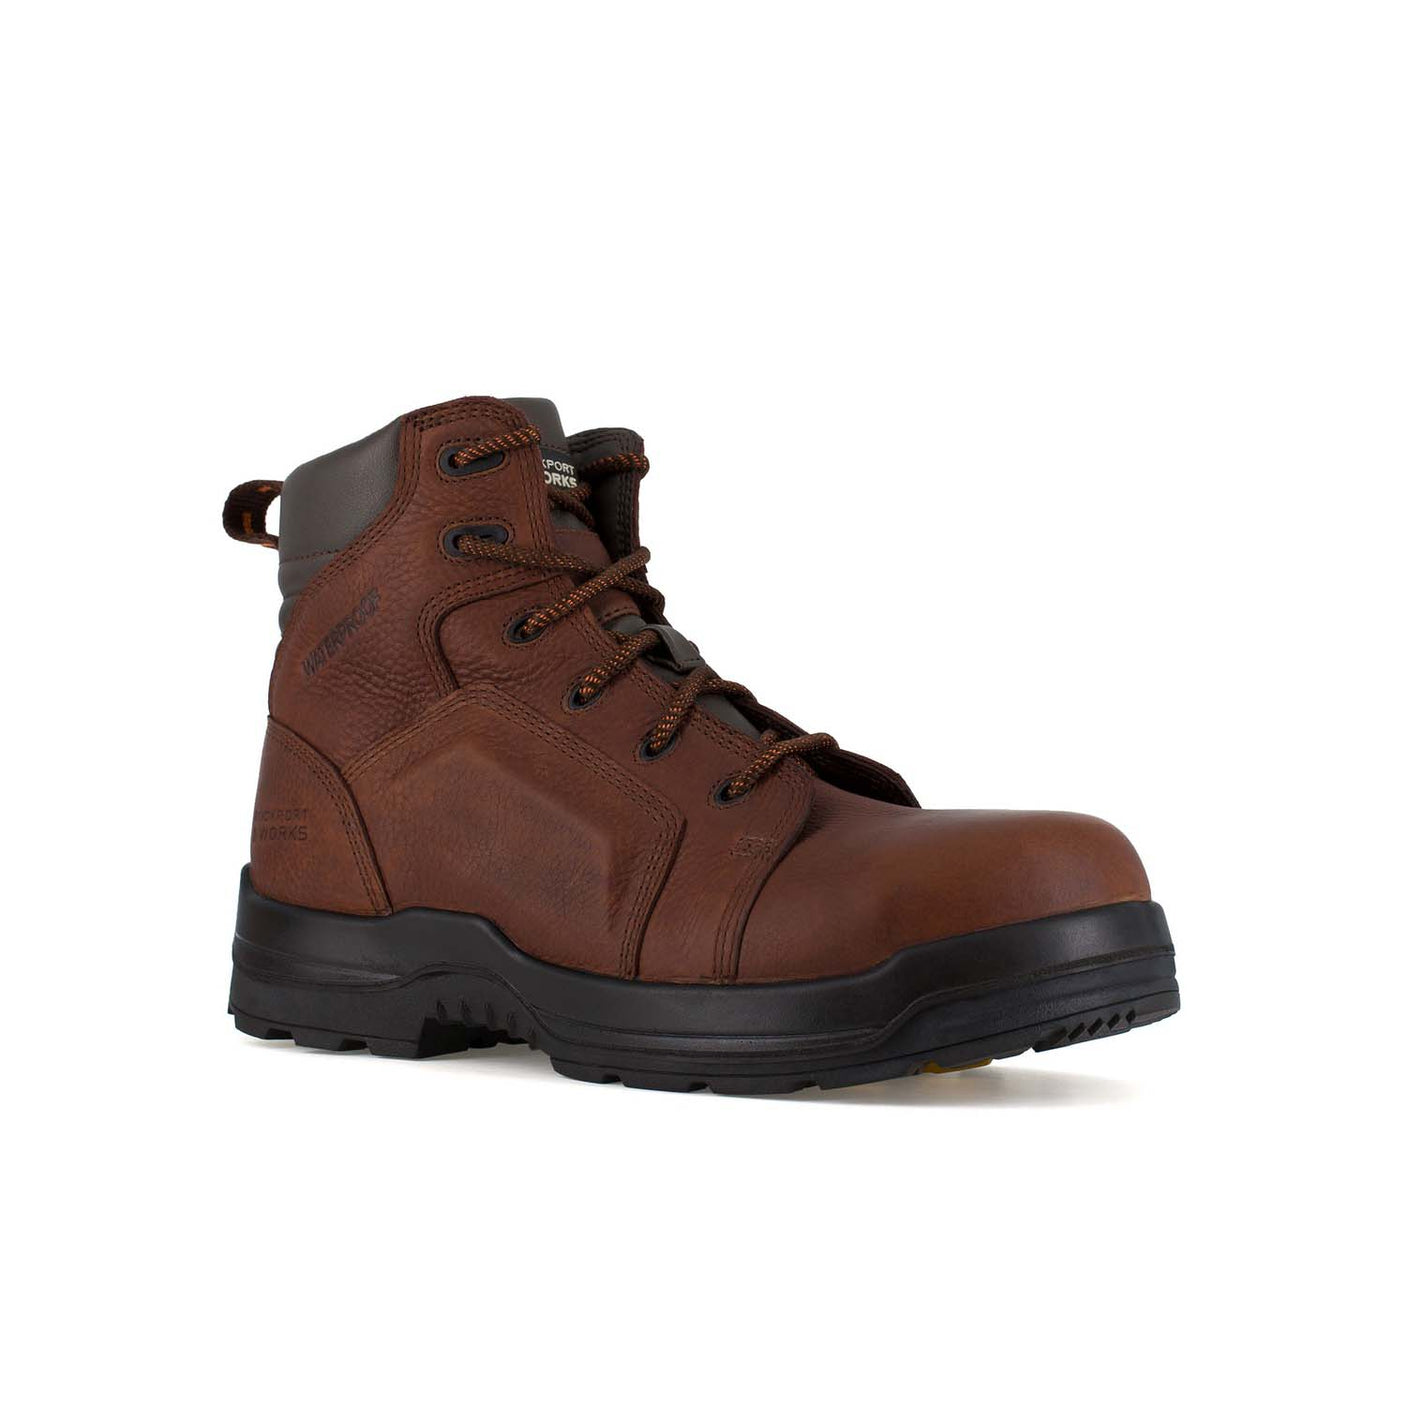 Rockport Work More Energy Comp-Toe Boots RK664-2